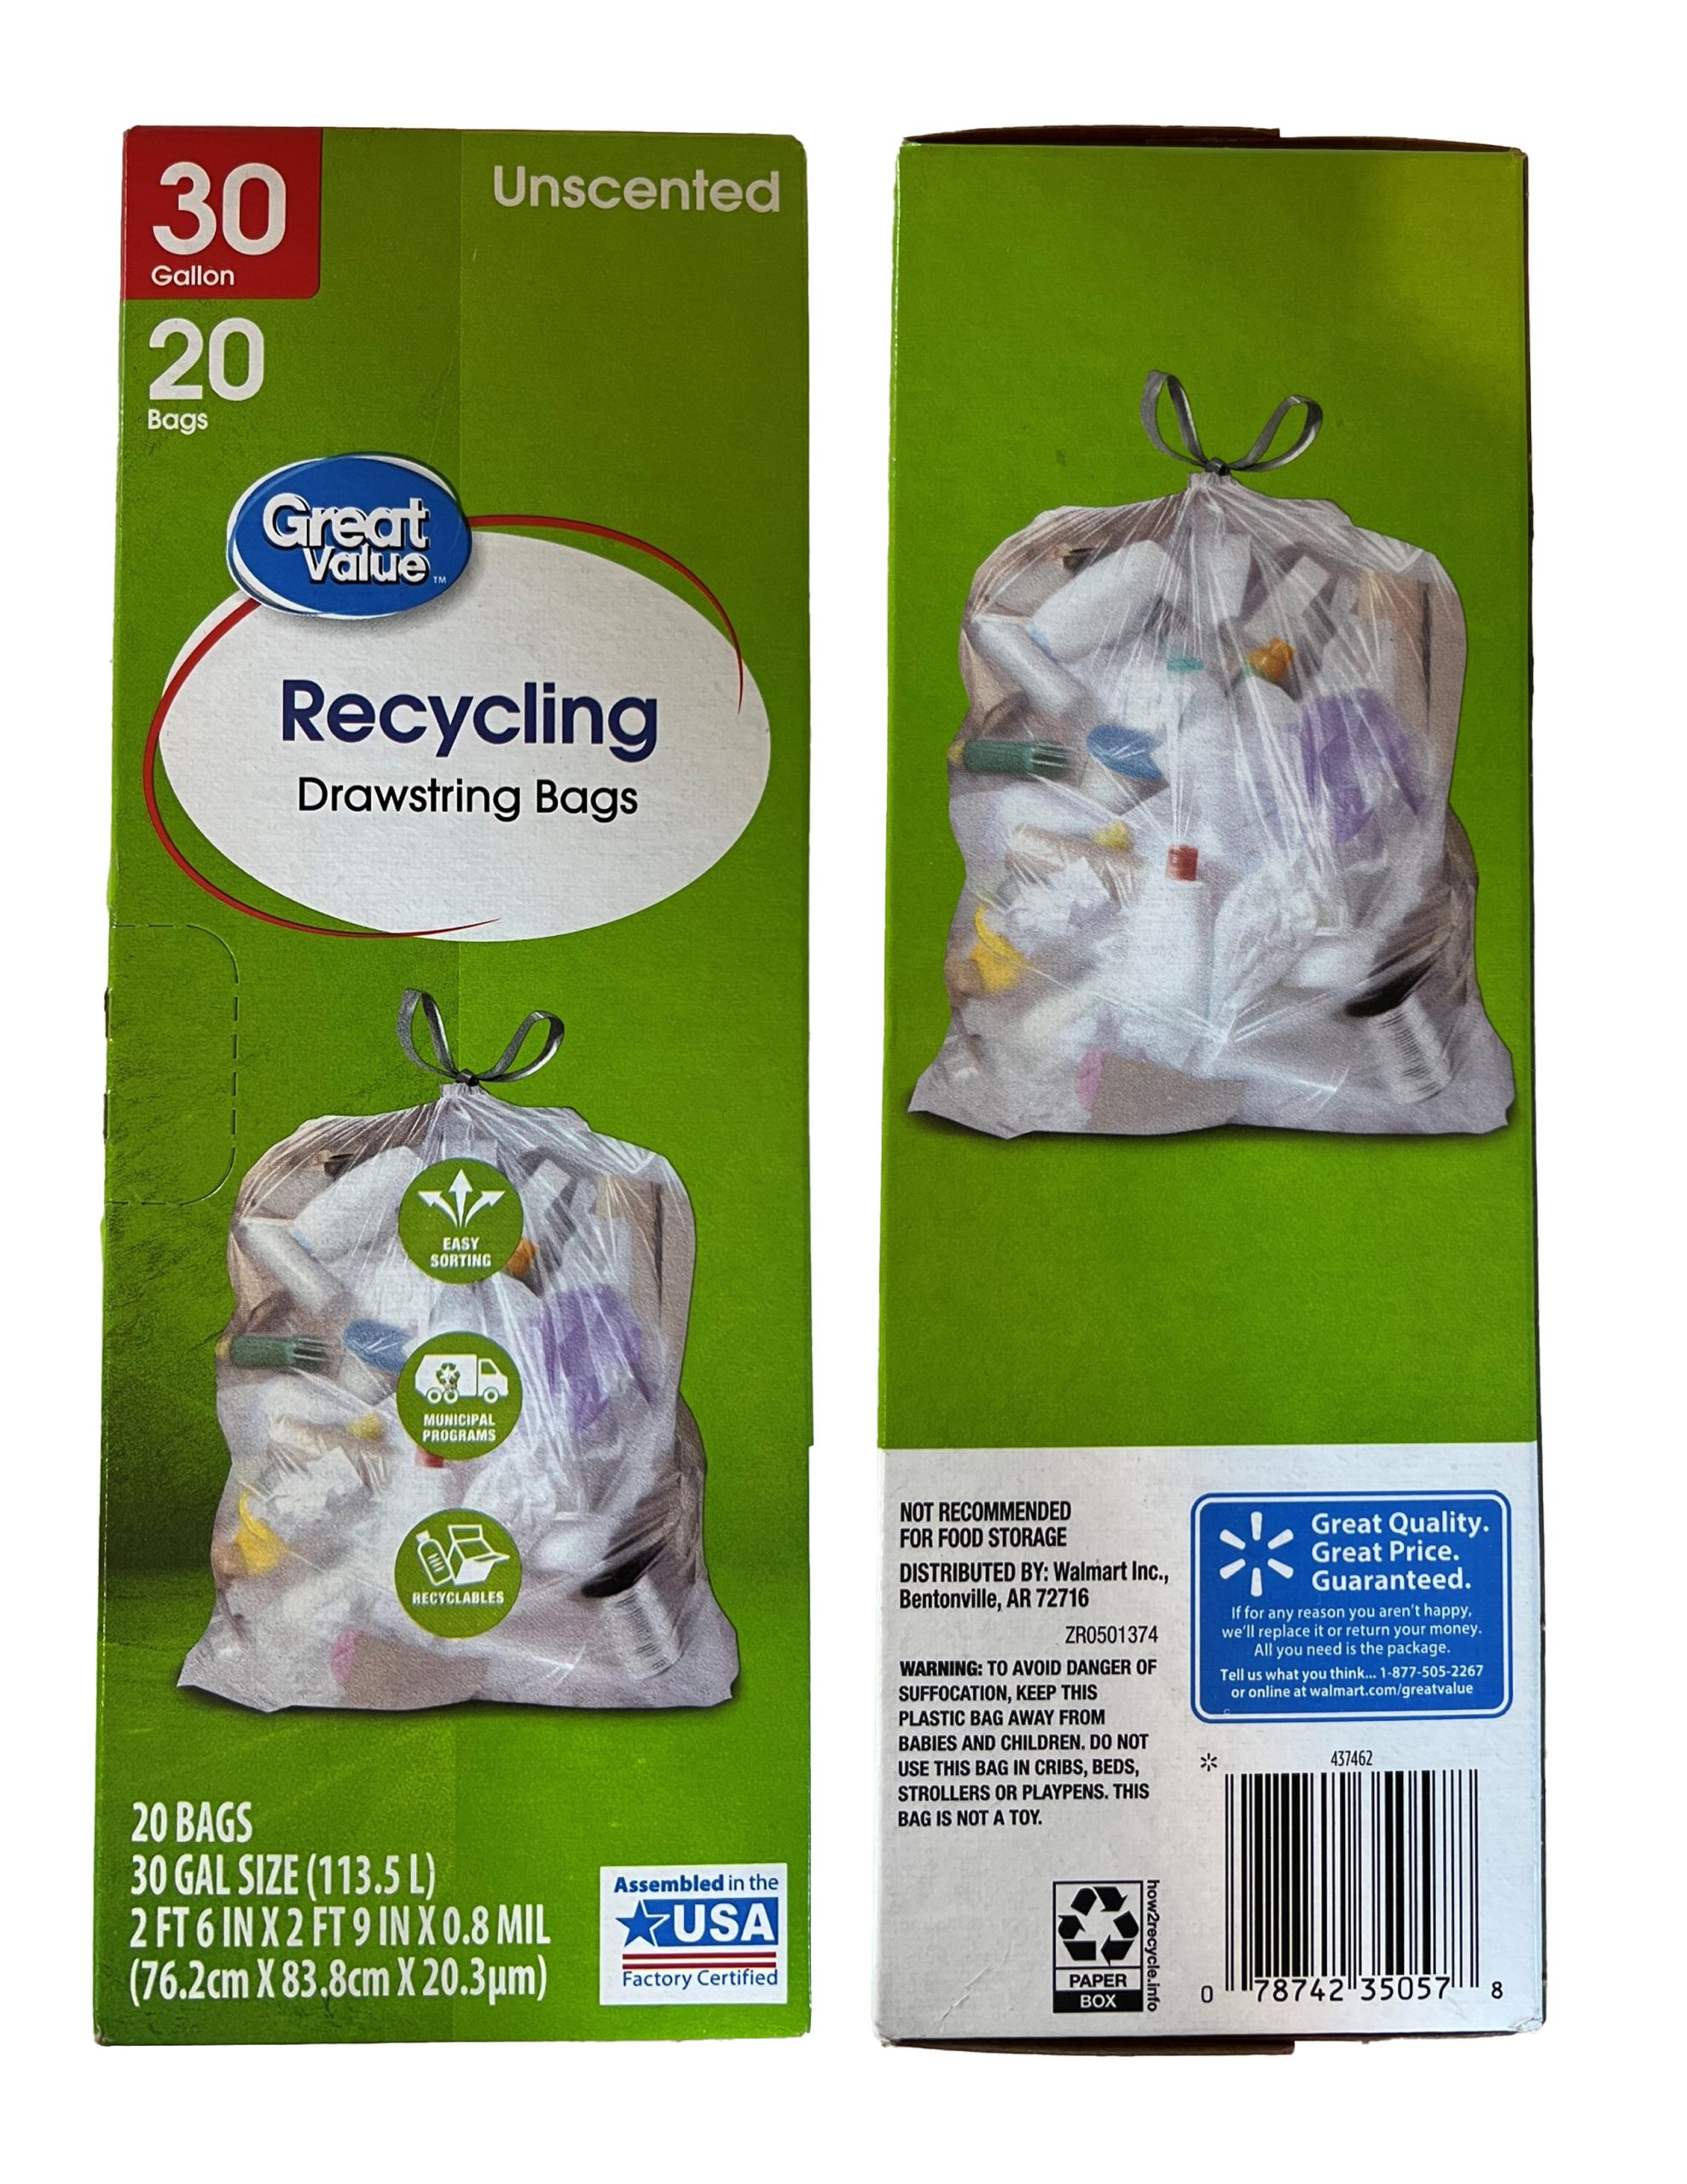 https://resource-recycling.com/recycling/wp-content/uploads/sites/3/2023/06/RecyclingBags_GreatValue_Img-scaled.jpg